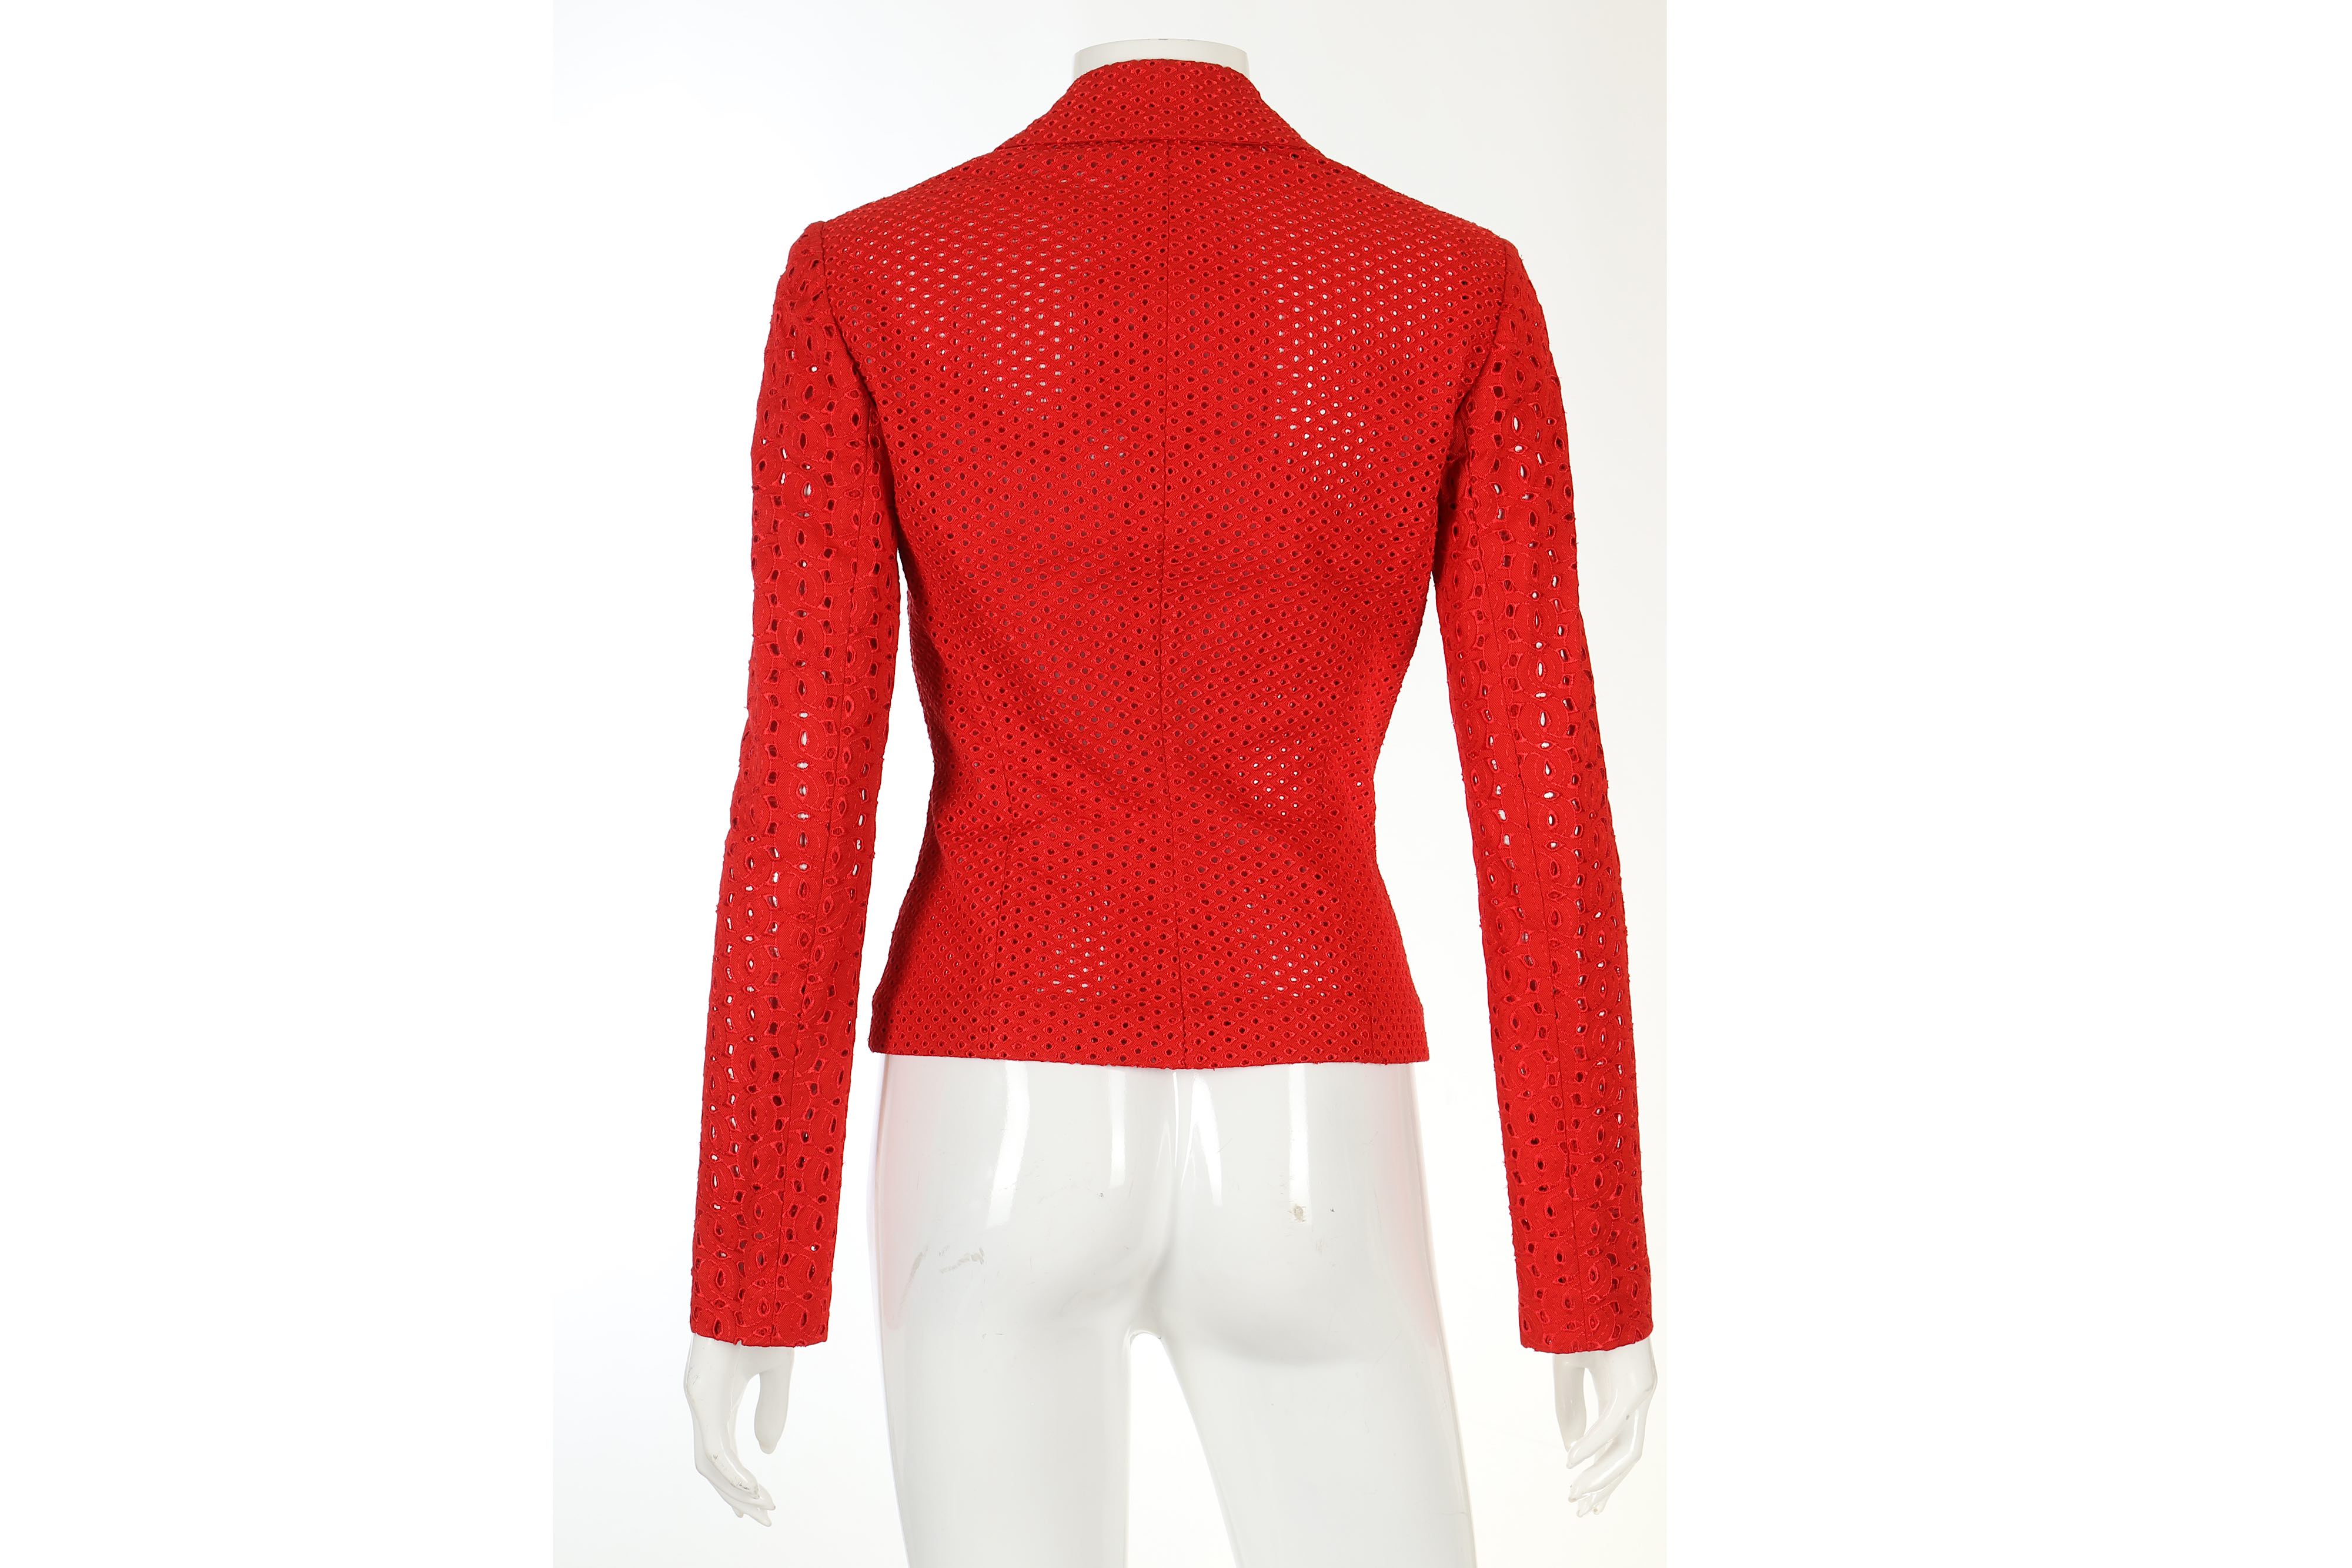 Gianni Versace Red Broderie Anglaise Jacket - size 38 - Image 2 of 5